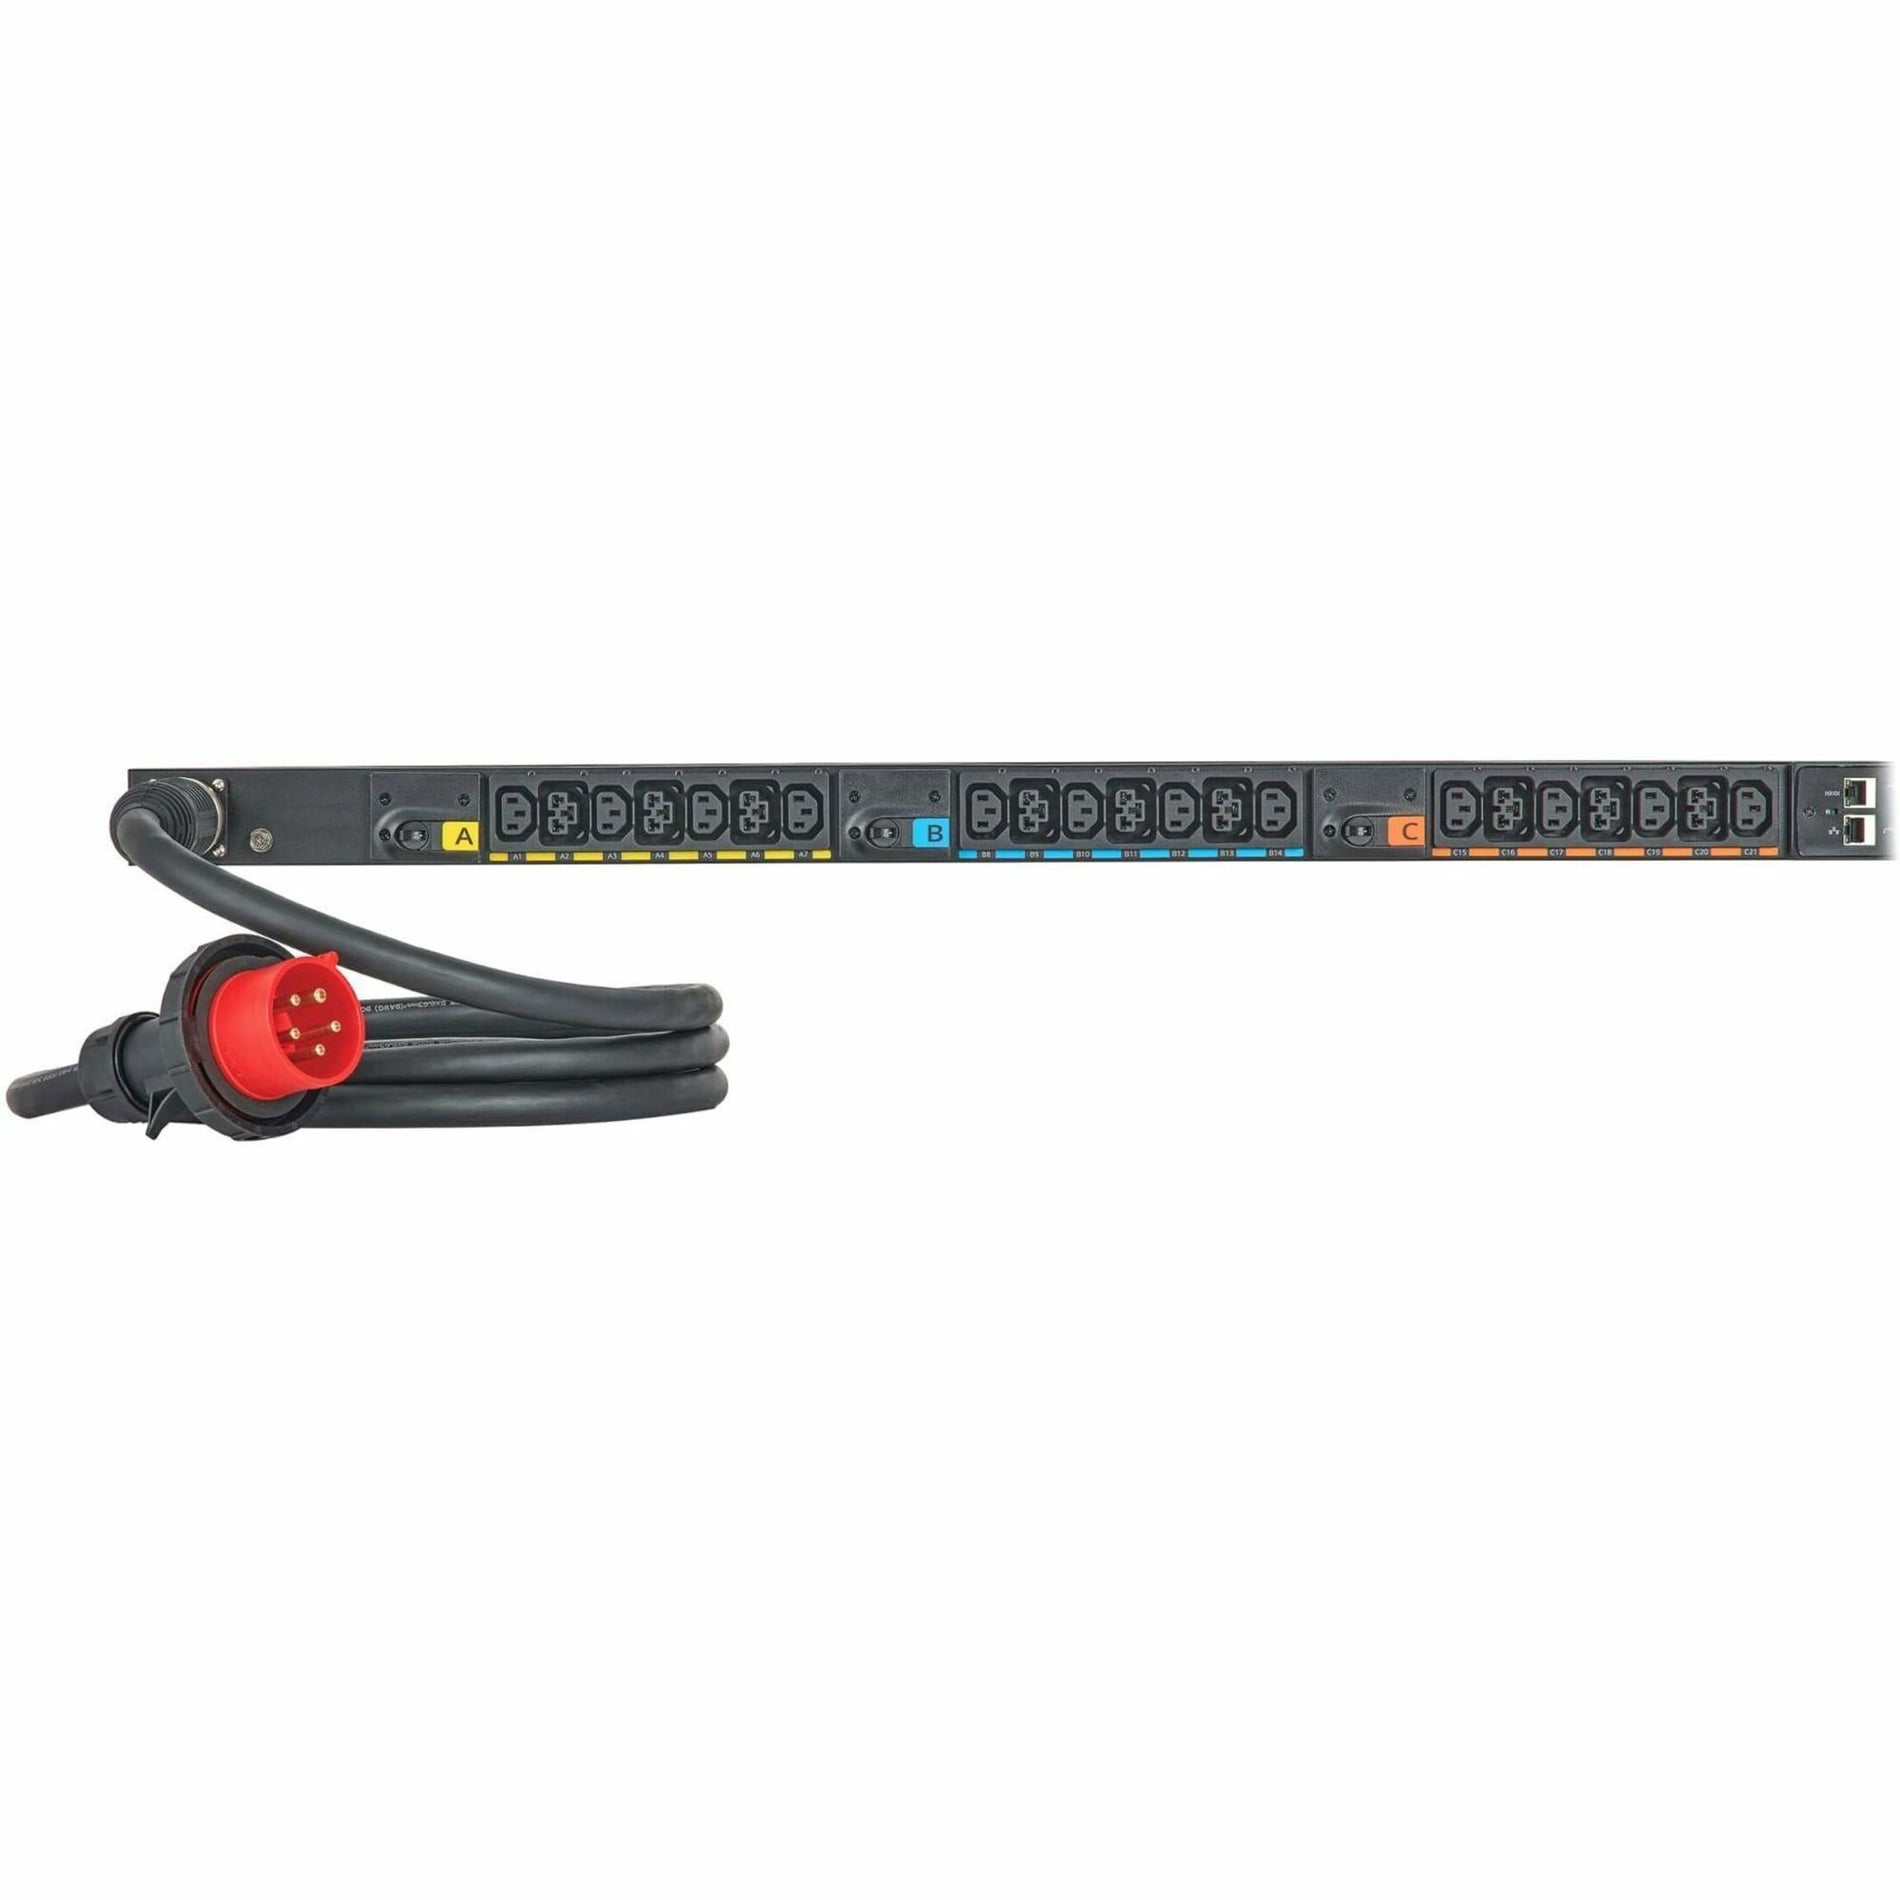 Eaton EVMAGU23X-3 G3 42-Outlets PDU, 23kVA Power Rating, Managed, Remote Outlet Switching